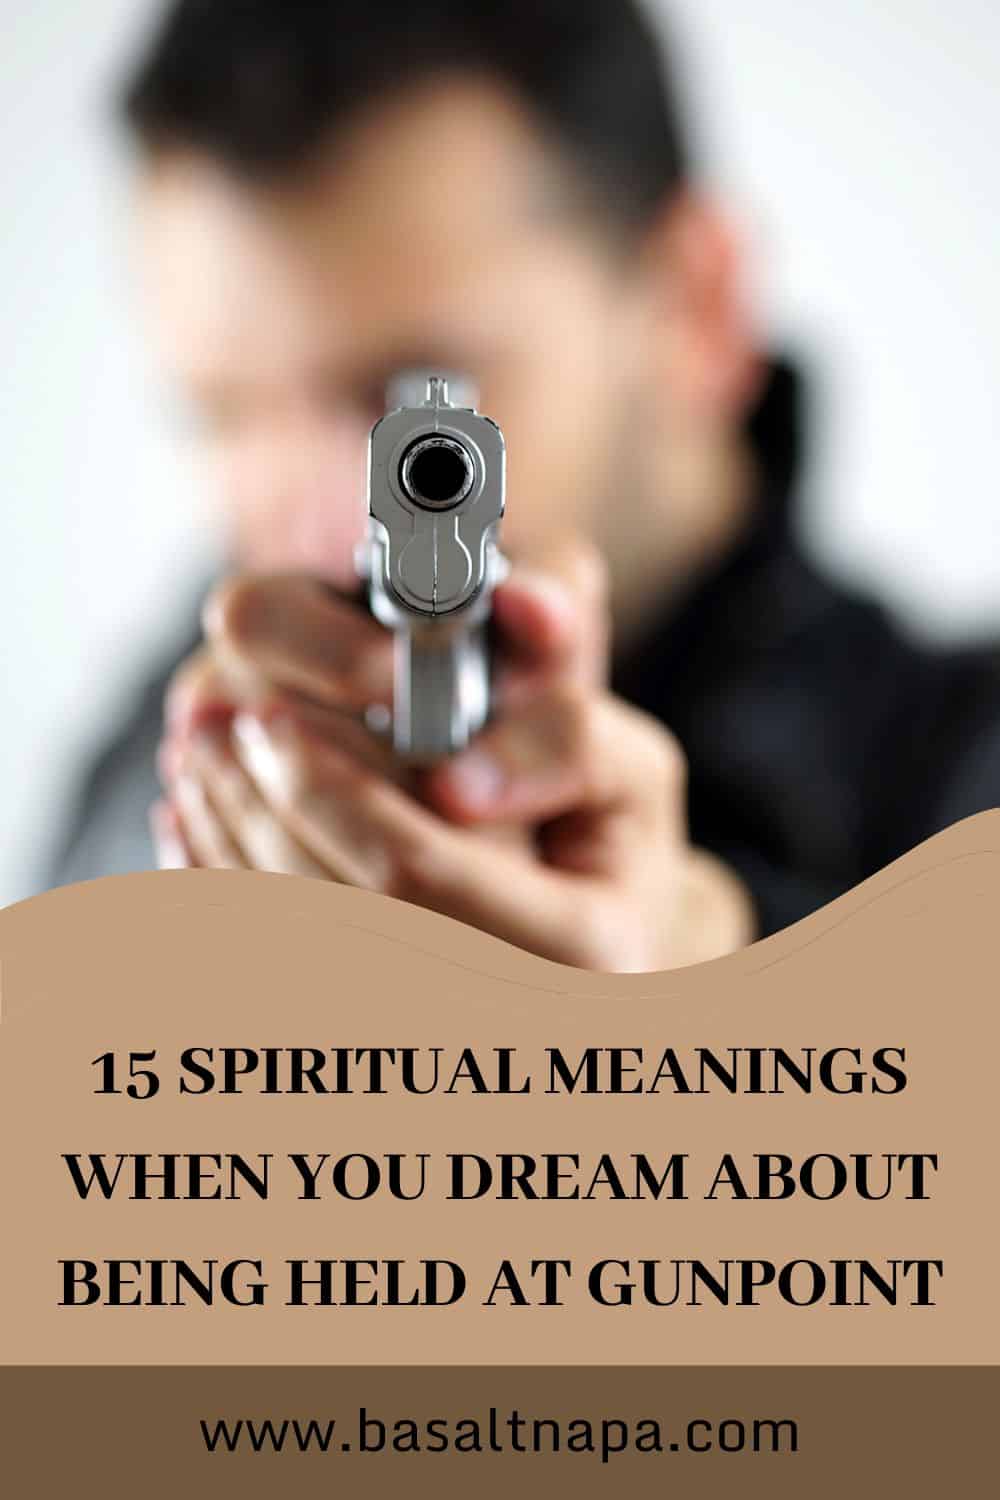 Things to Remember When Interpreting Your Dream